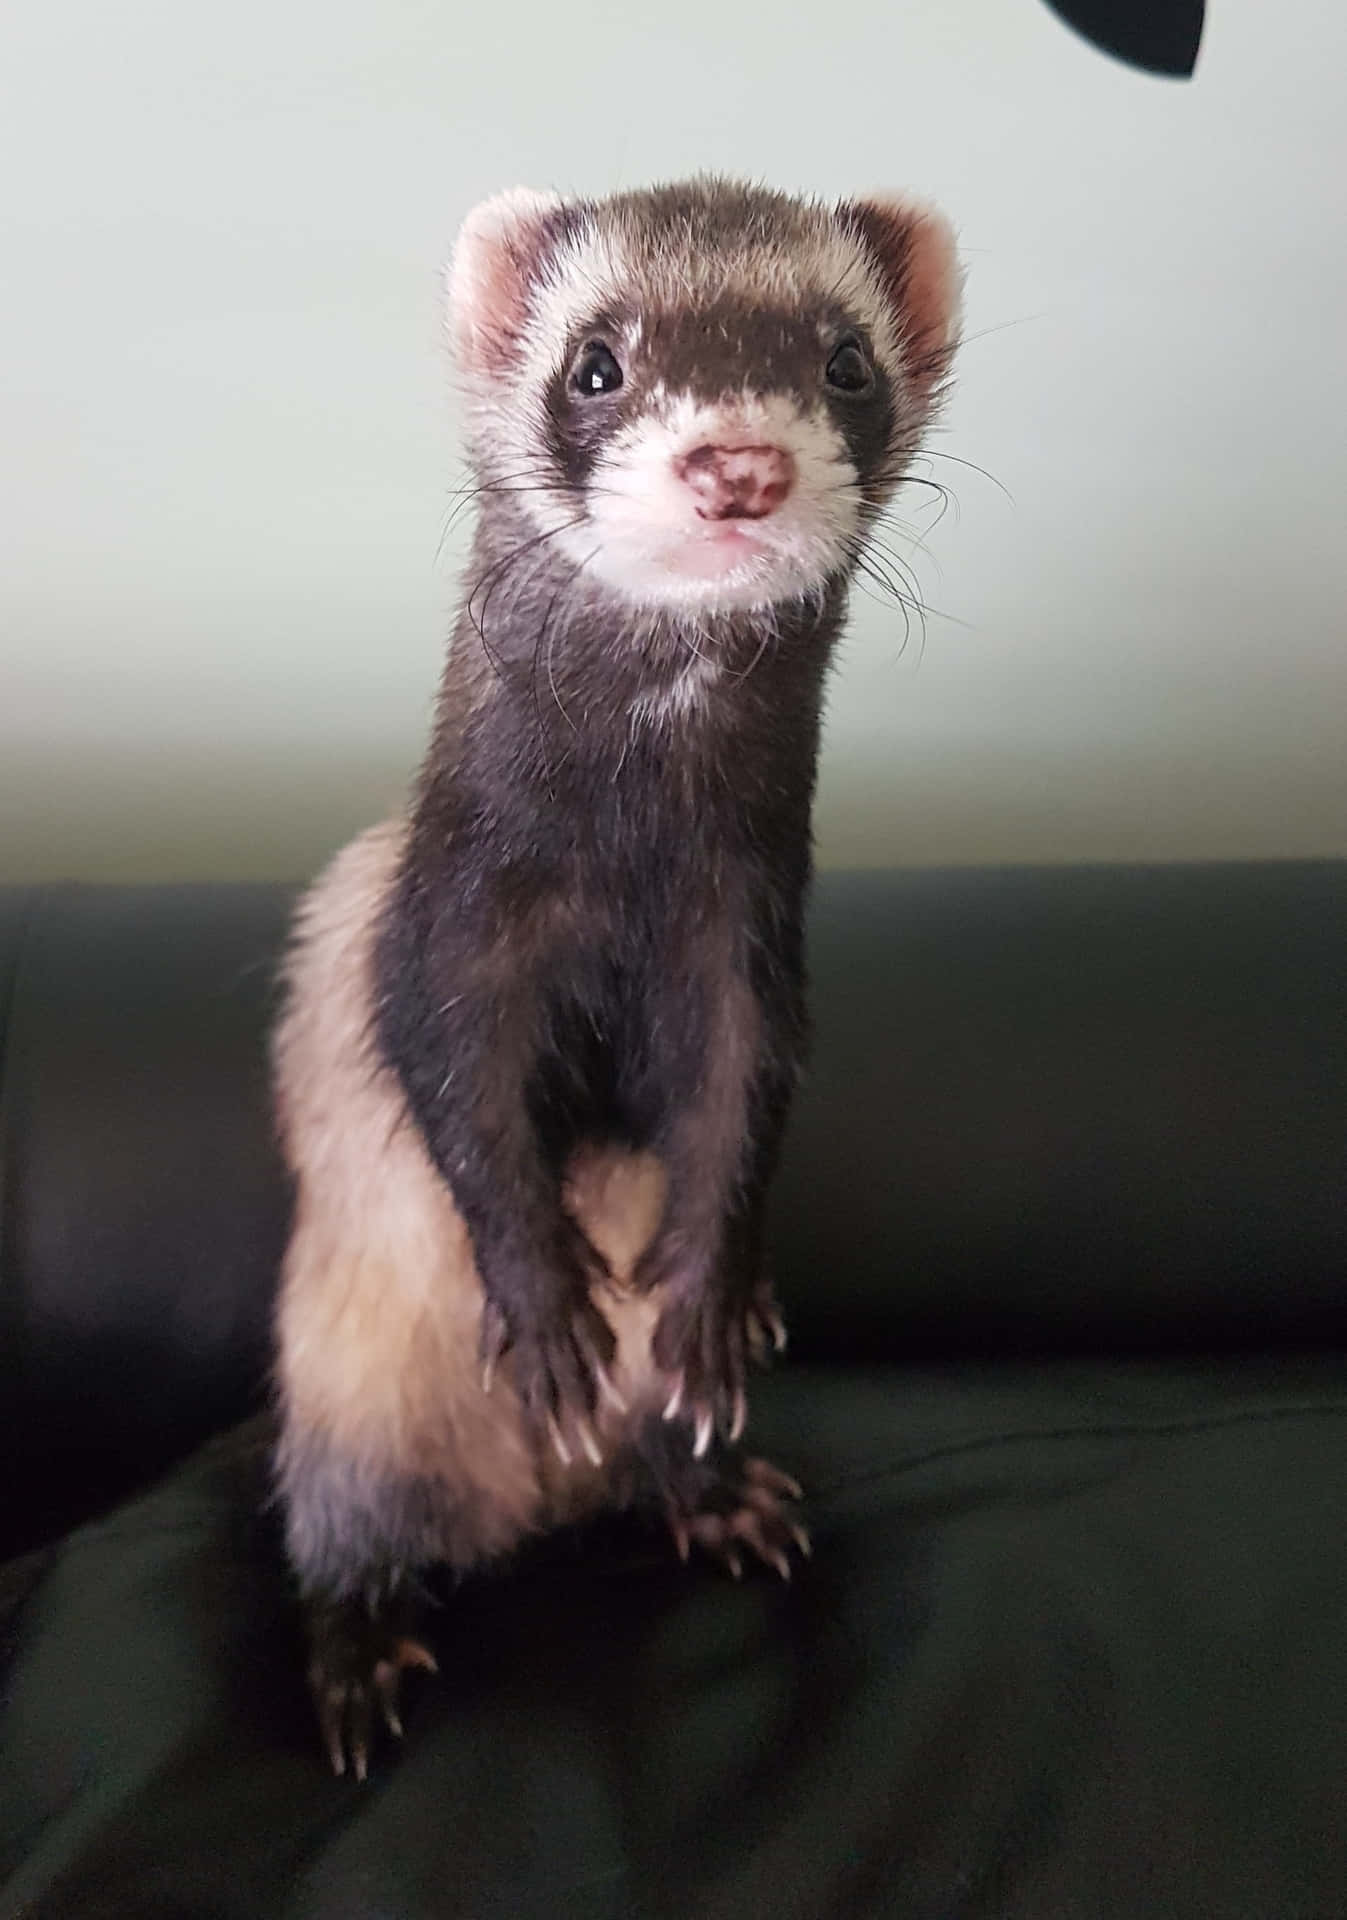 Ferret Sitting On A Black Couch